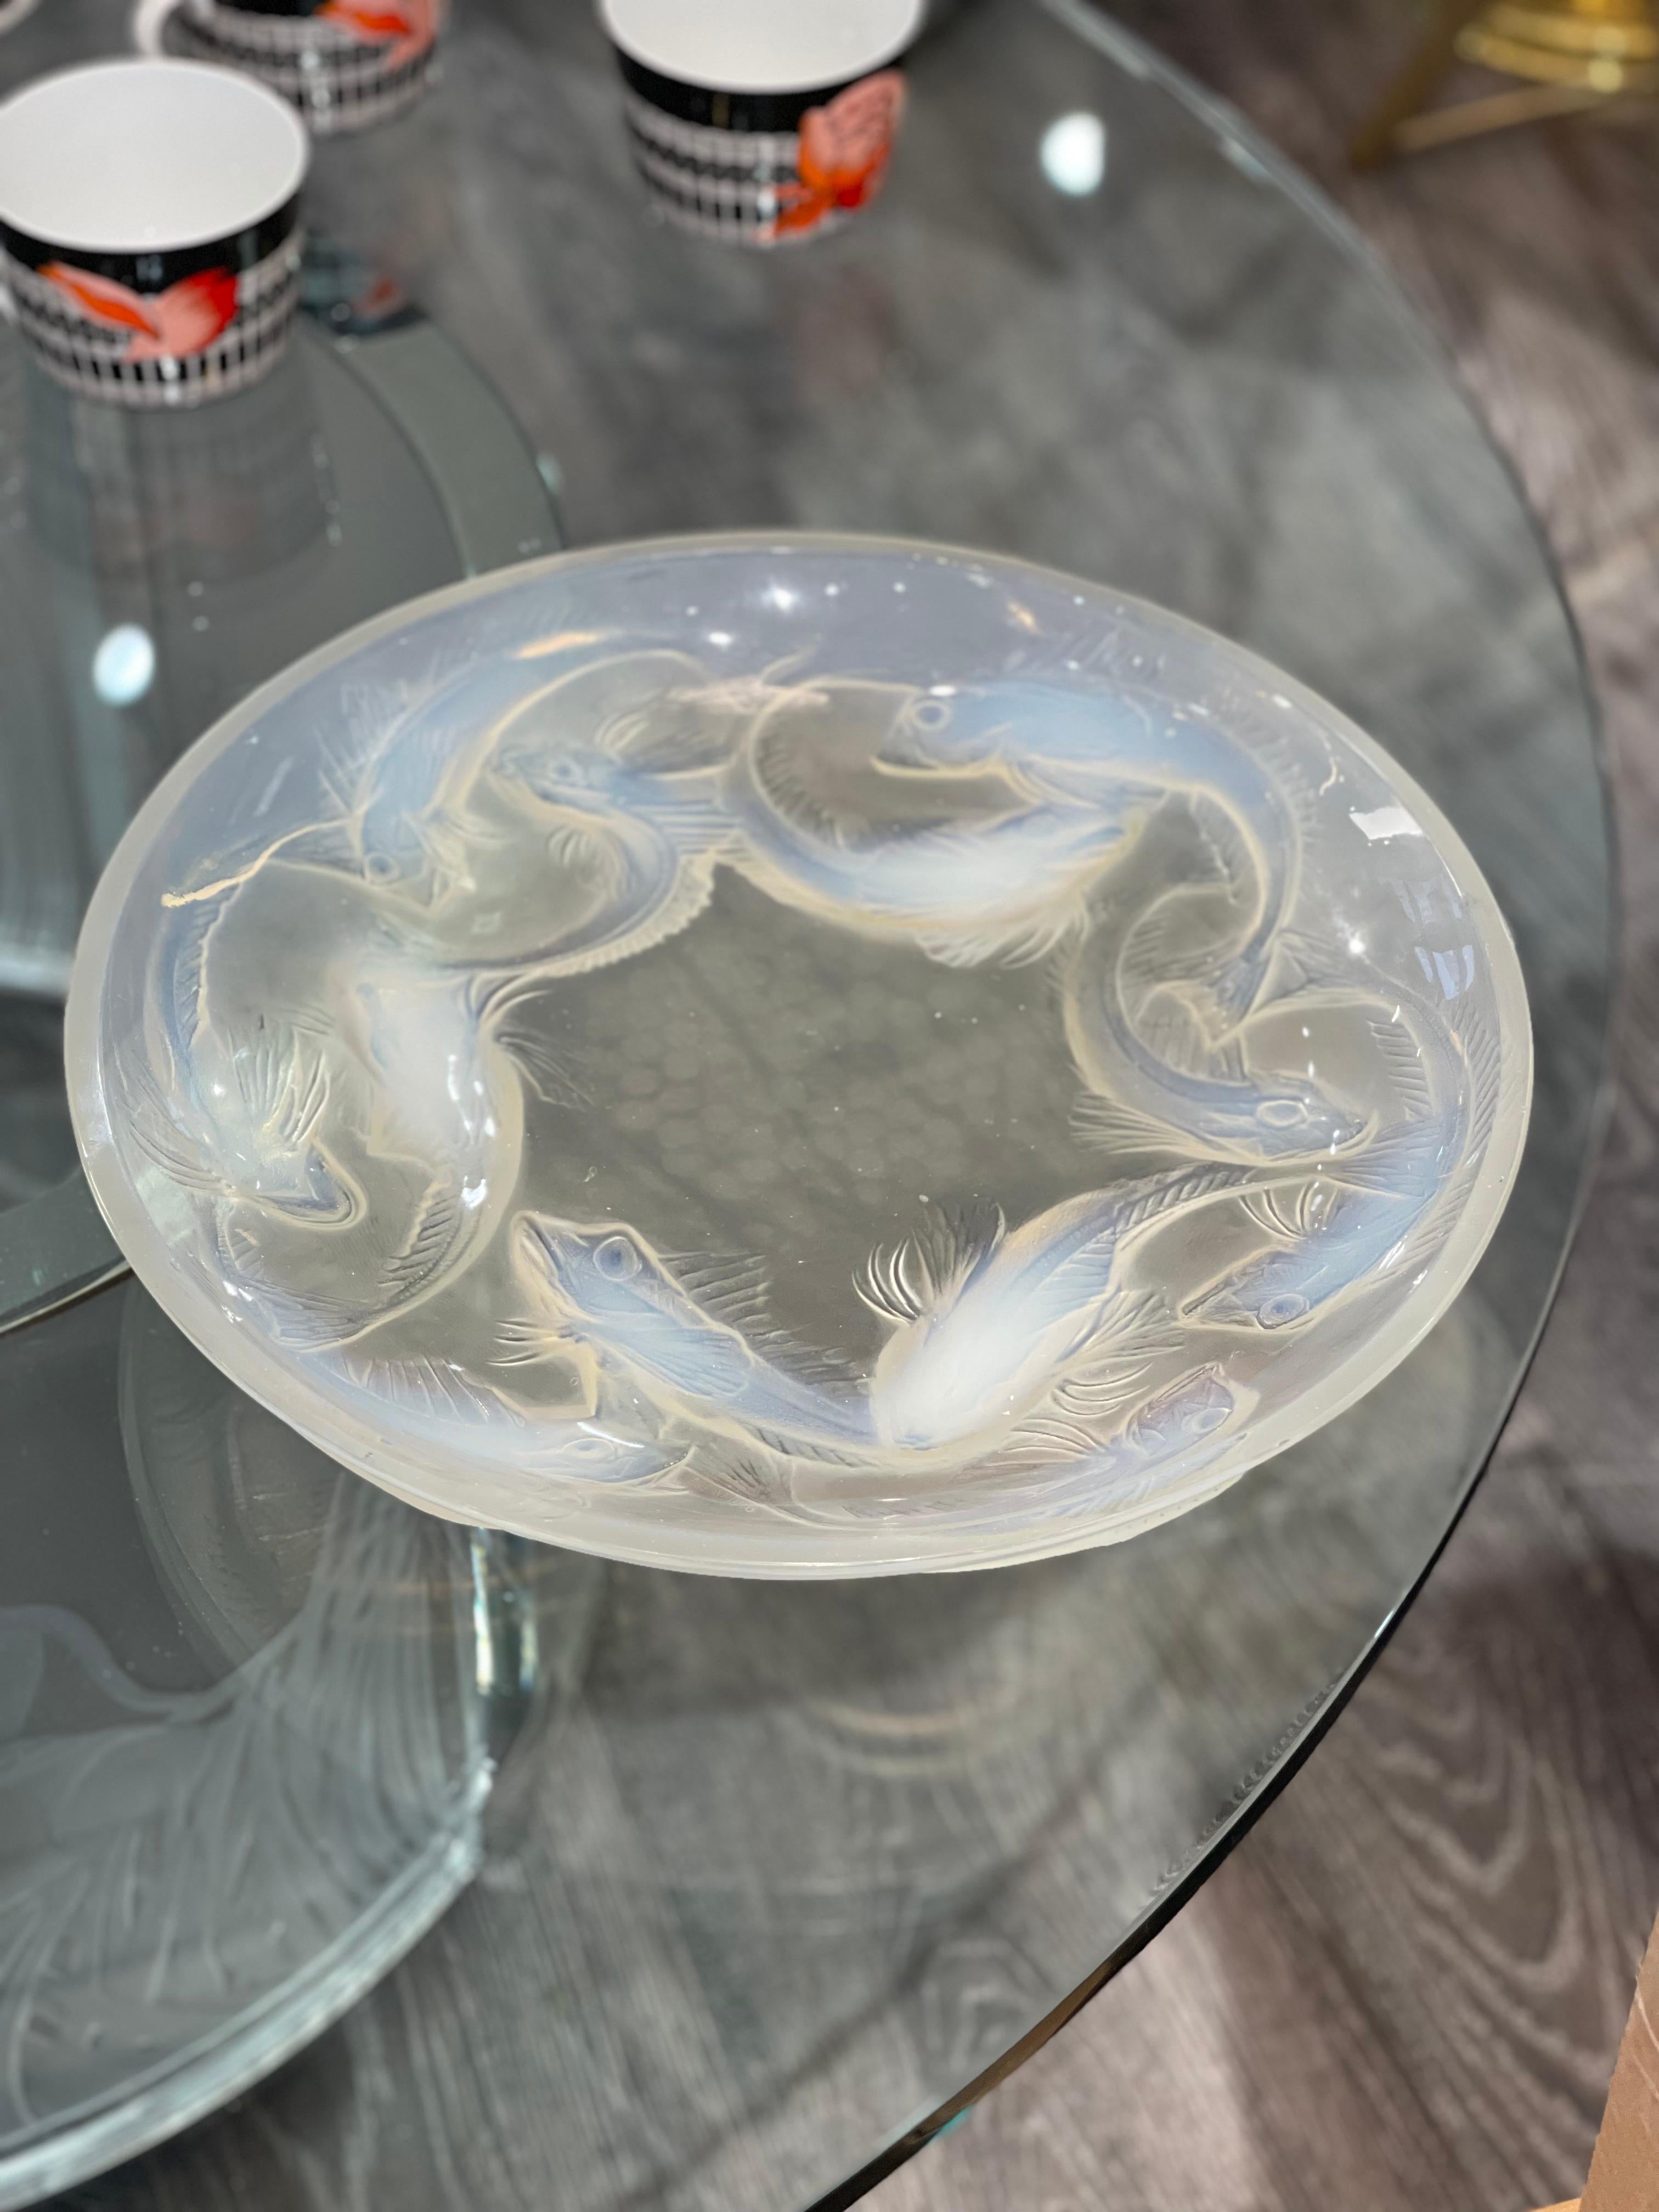 Heavily molded opalescent molded blown glass fish motif glass
Martigues opalescent glass bowl
thickly molded pressed glass and fish decorated shallow Model: 377, circa 1920.
Bibliographies:
Félix Marcilhac, 